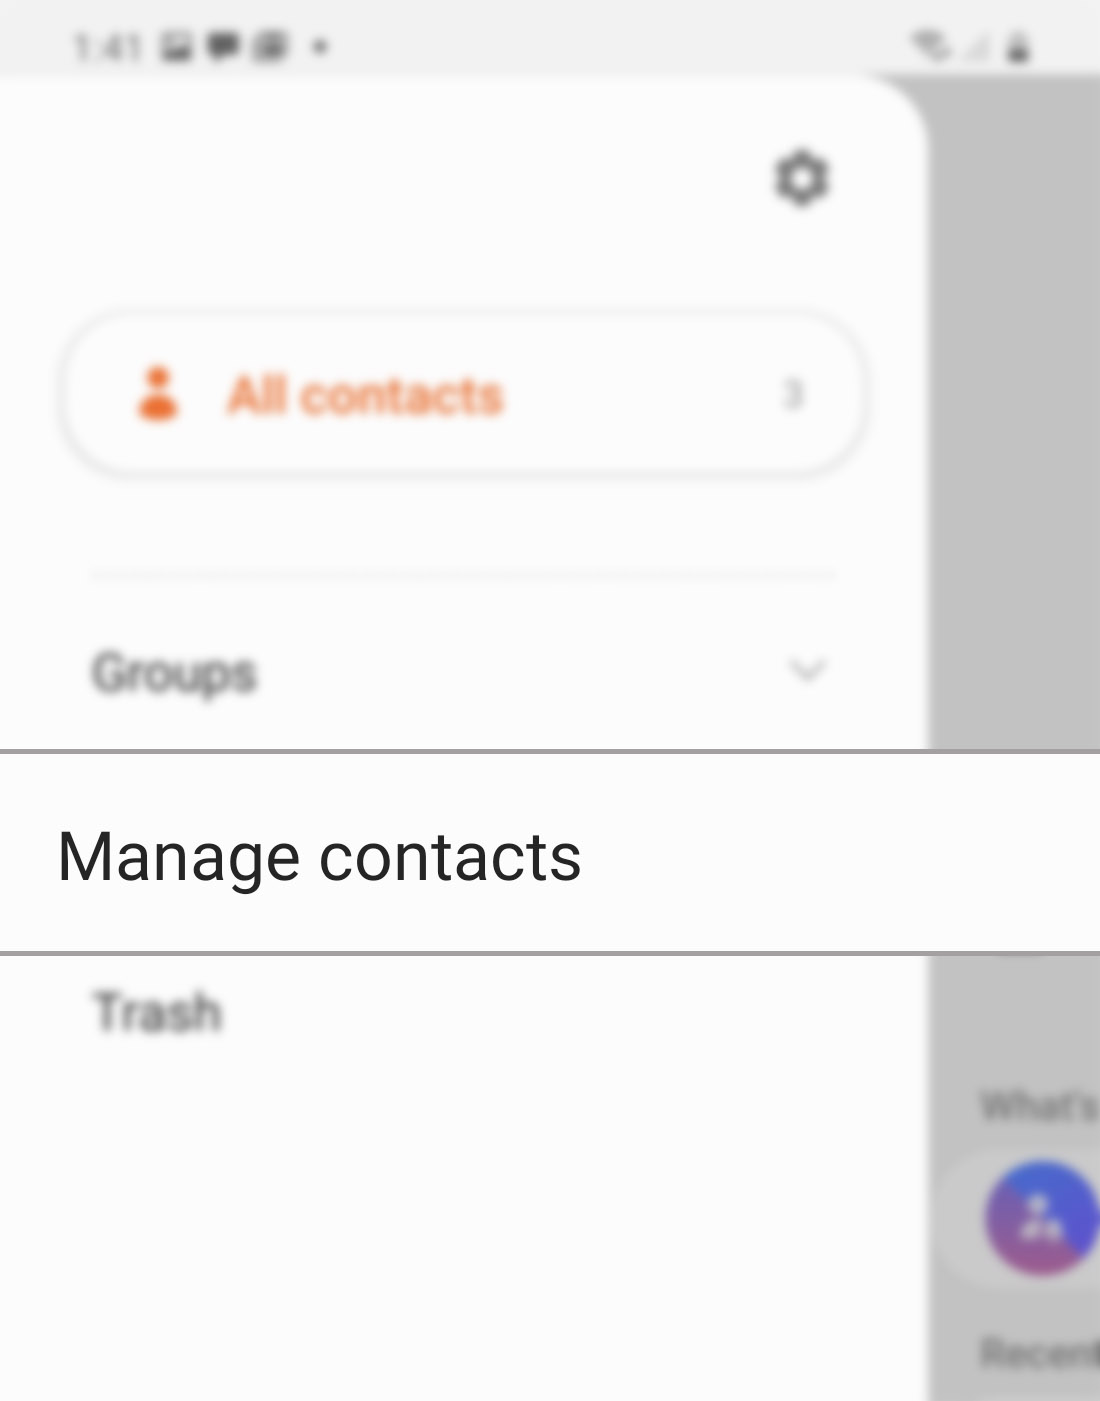 sync account contacts on galaxy s20 - manage contacts